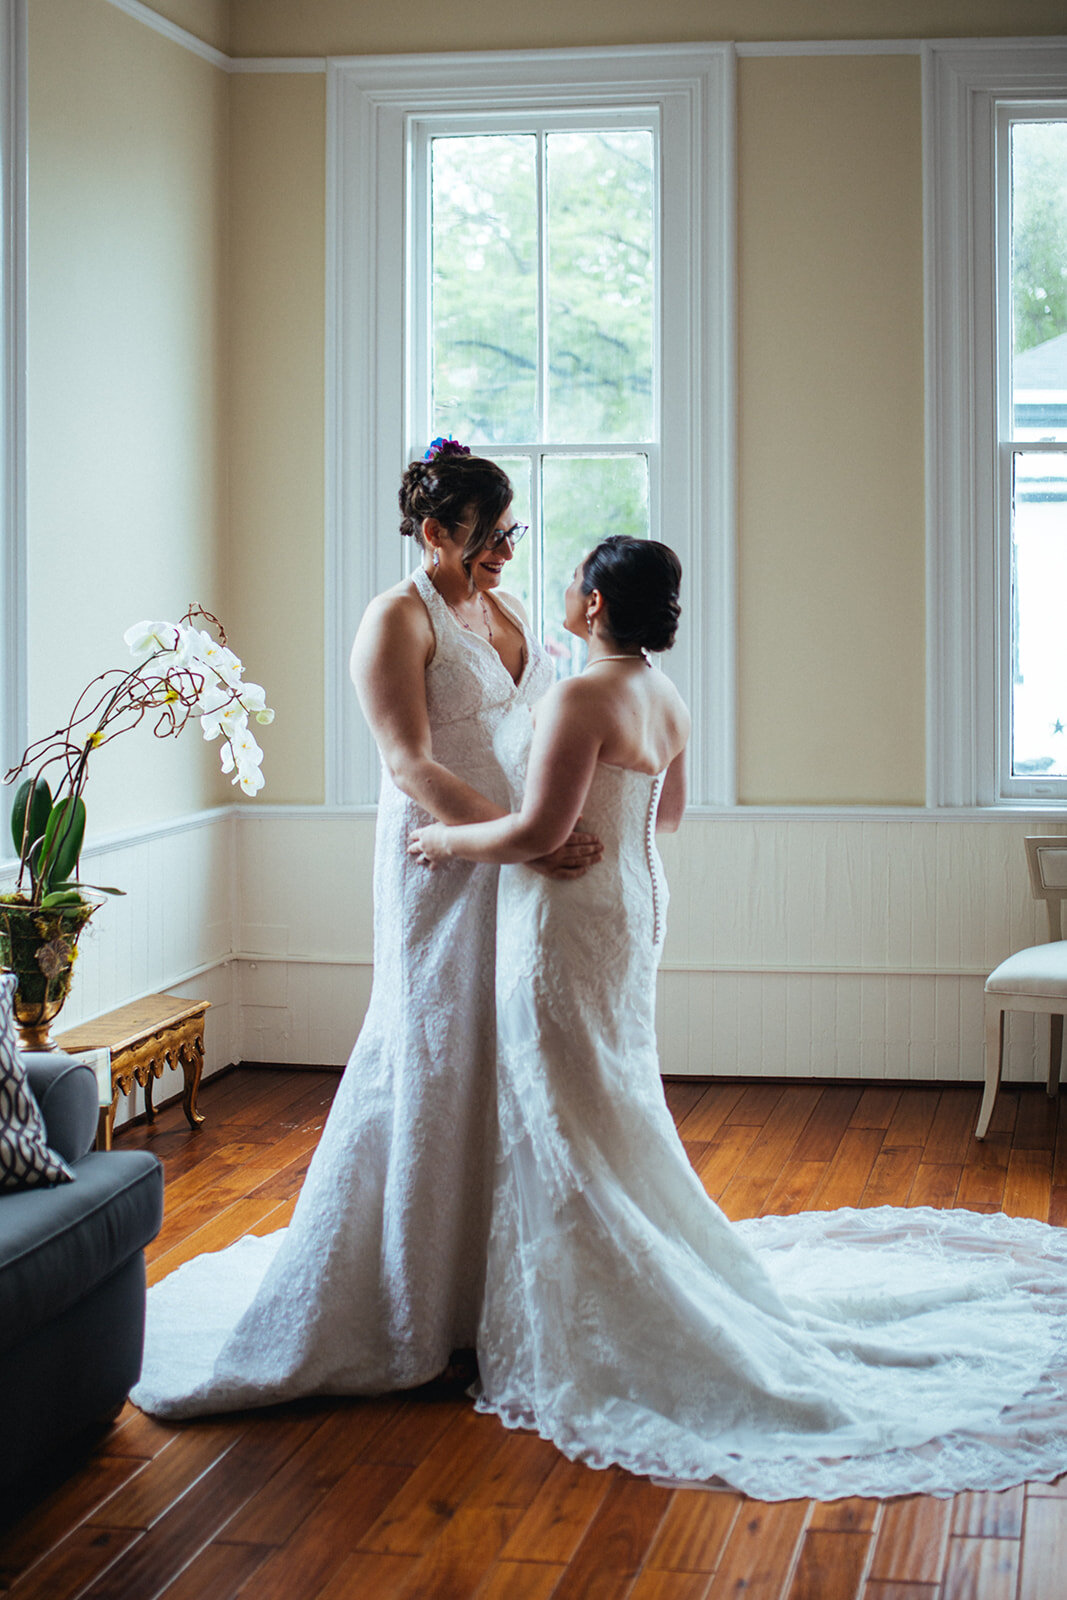 Two brides smiling together before wedding at Torpedo Factory Alexandria VA Shawnee Custalow Queer Wedding Photography